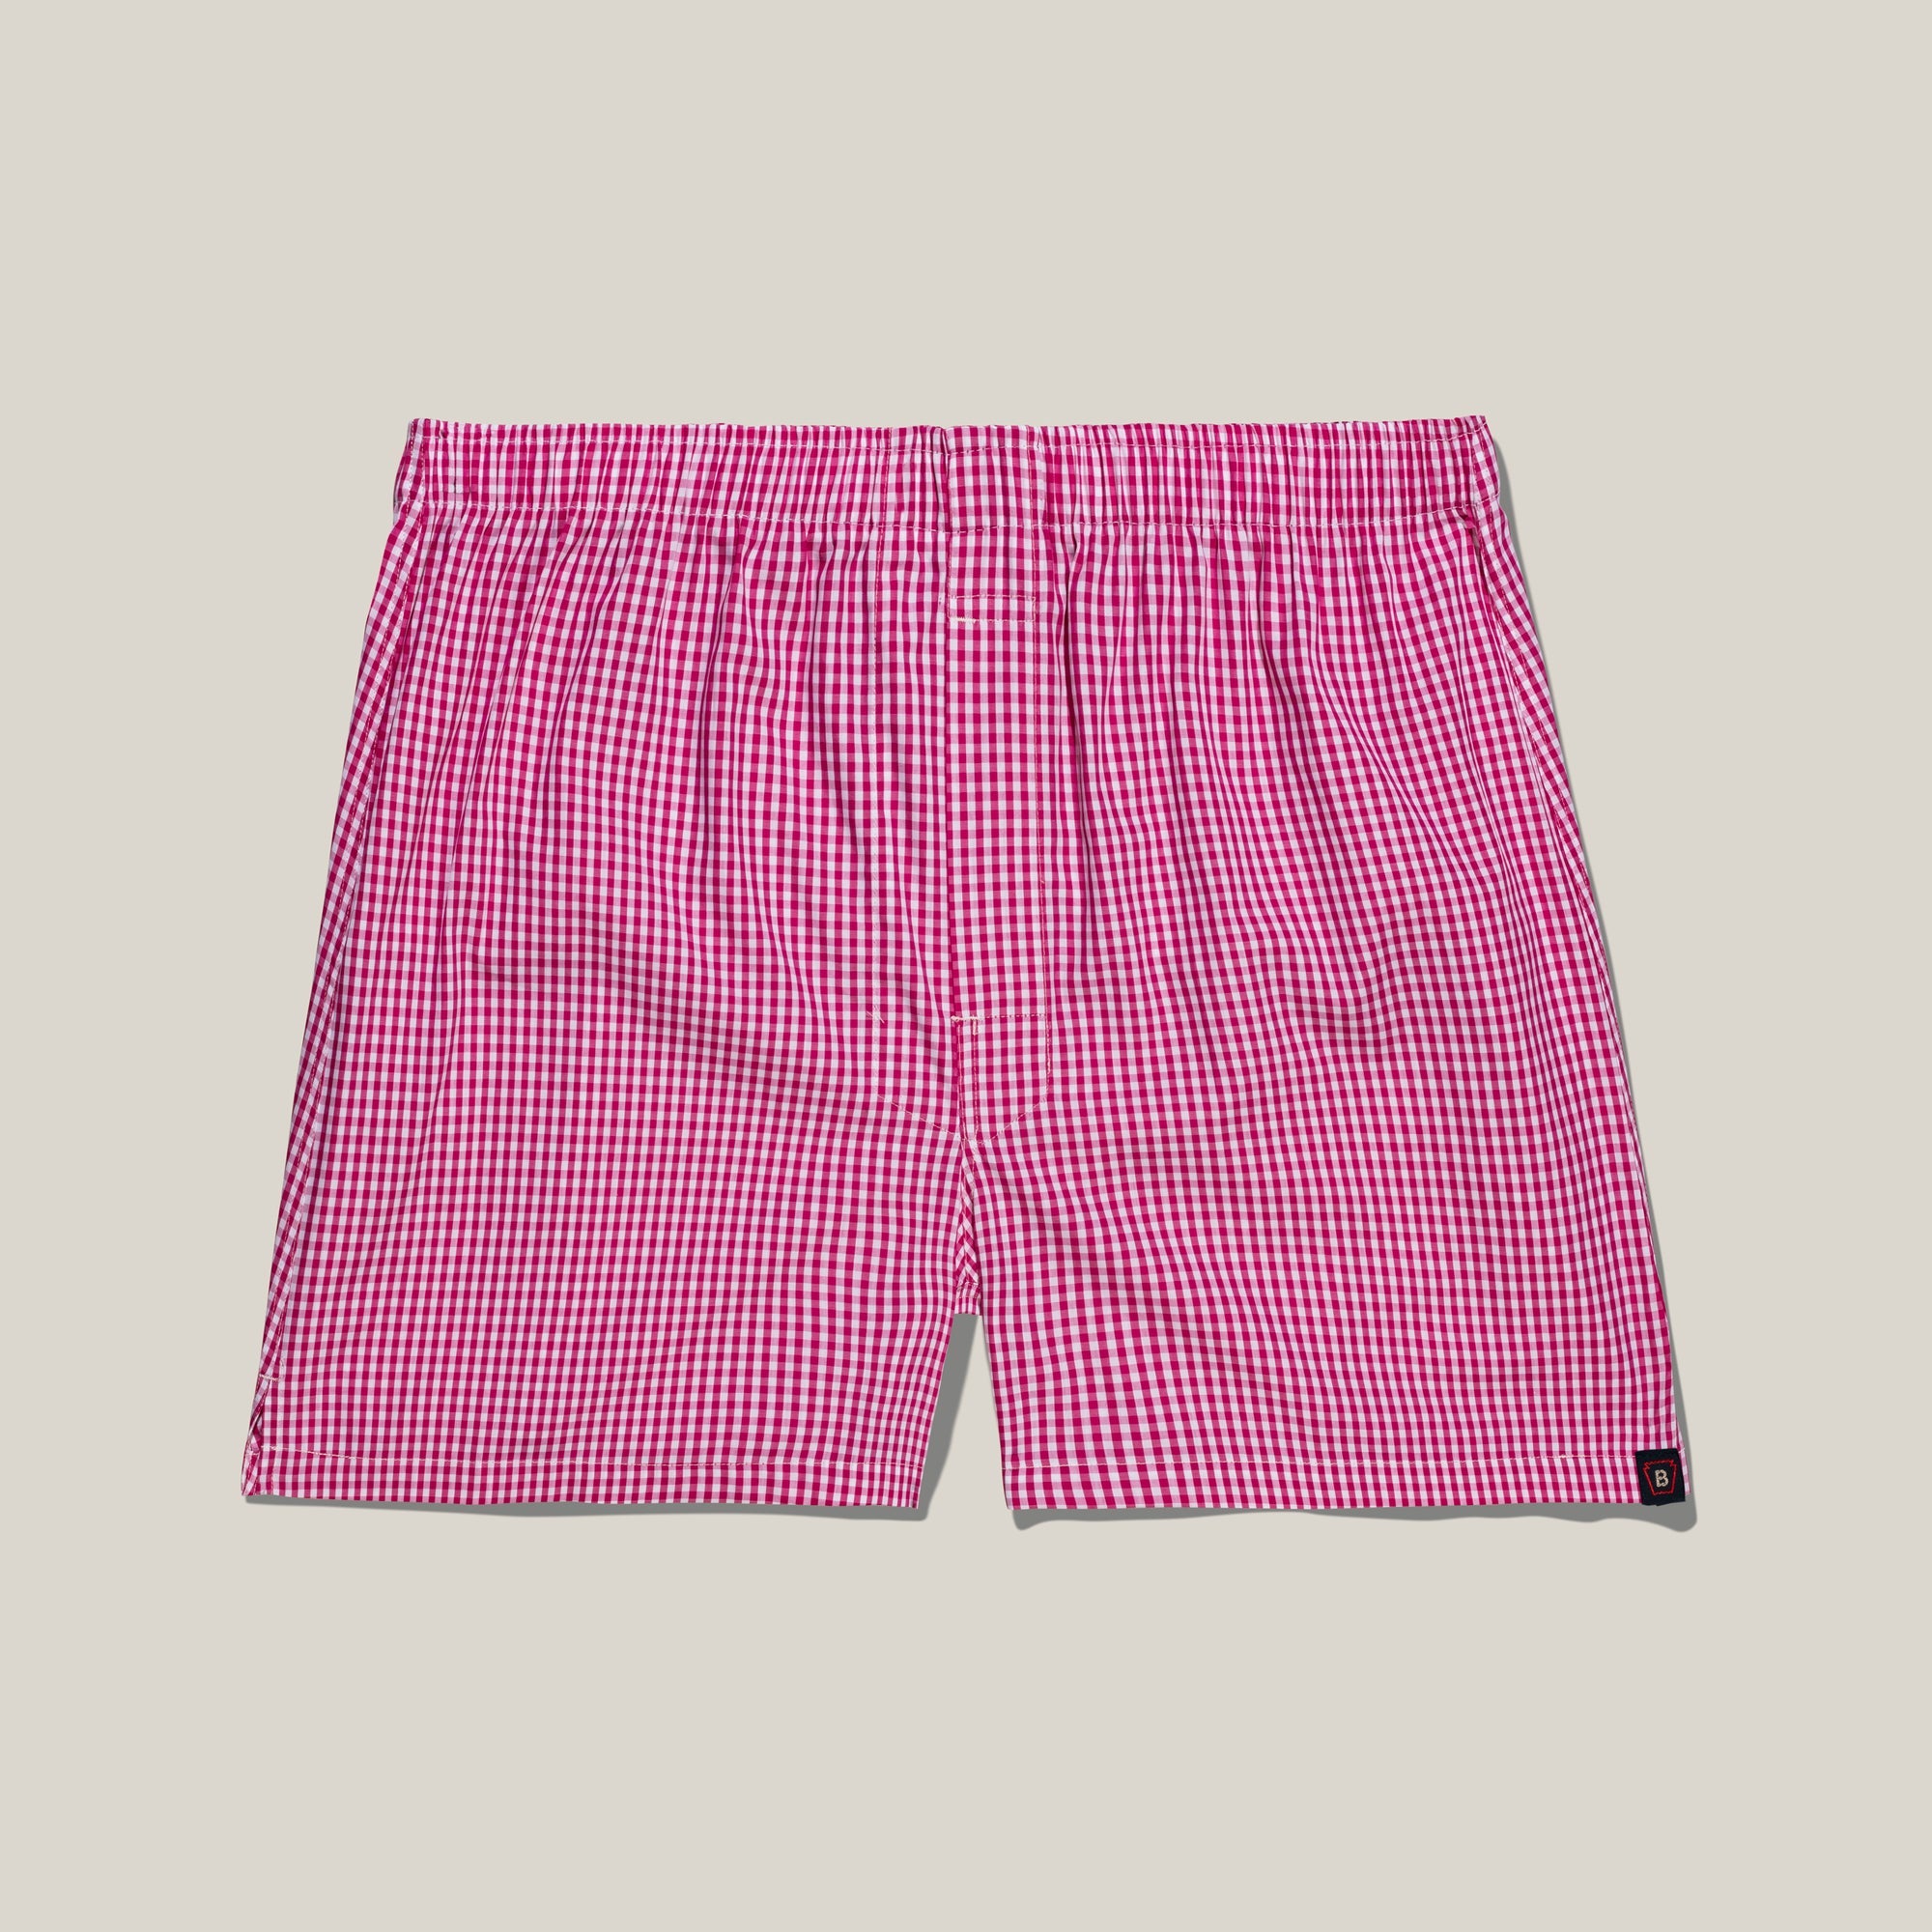 Classic Gingham Cotton Boxer in Magenta by Bills Khakis